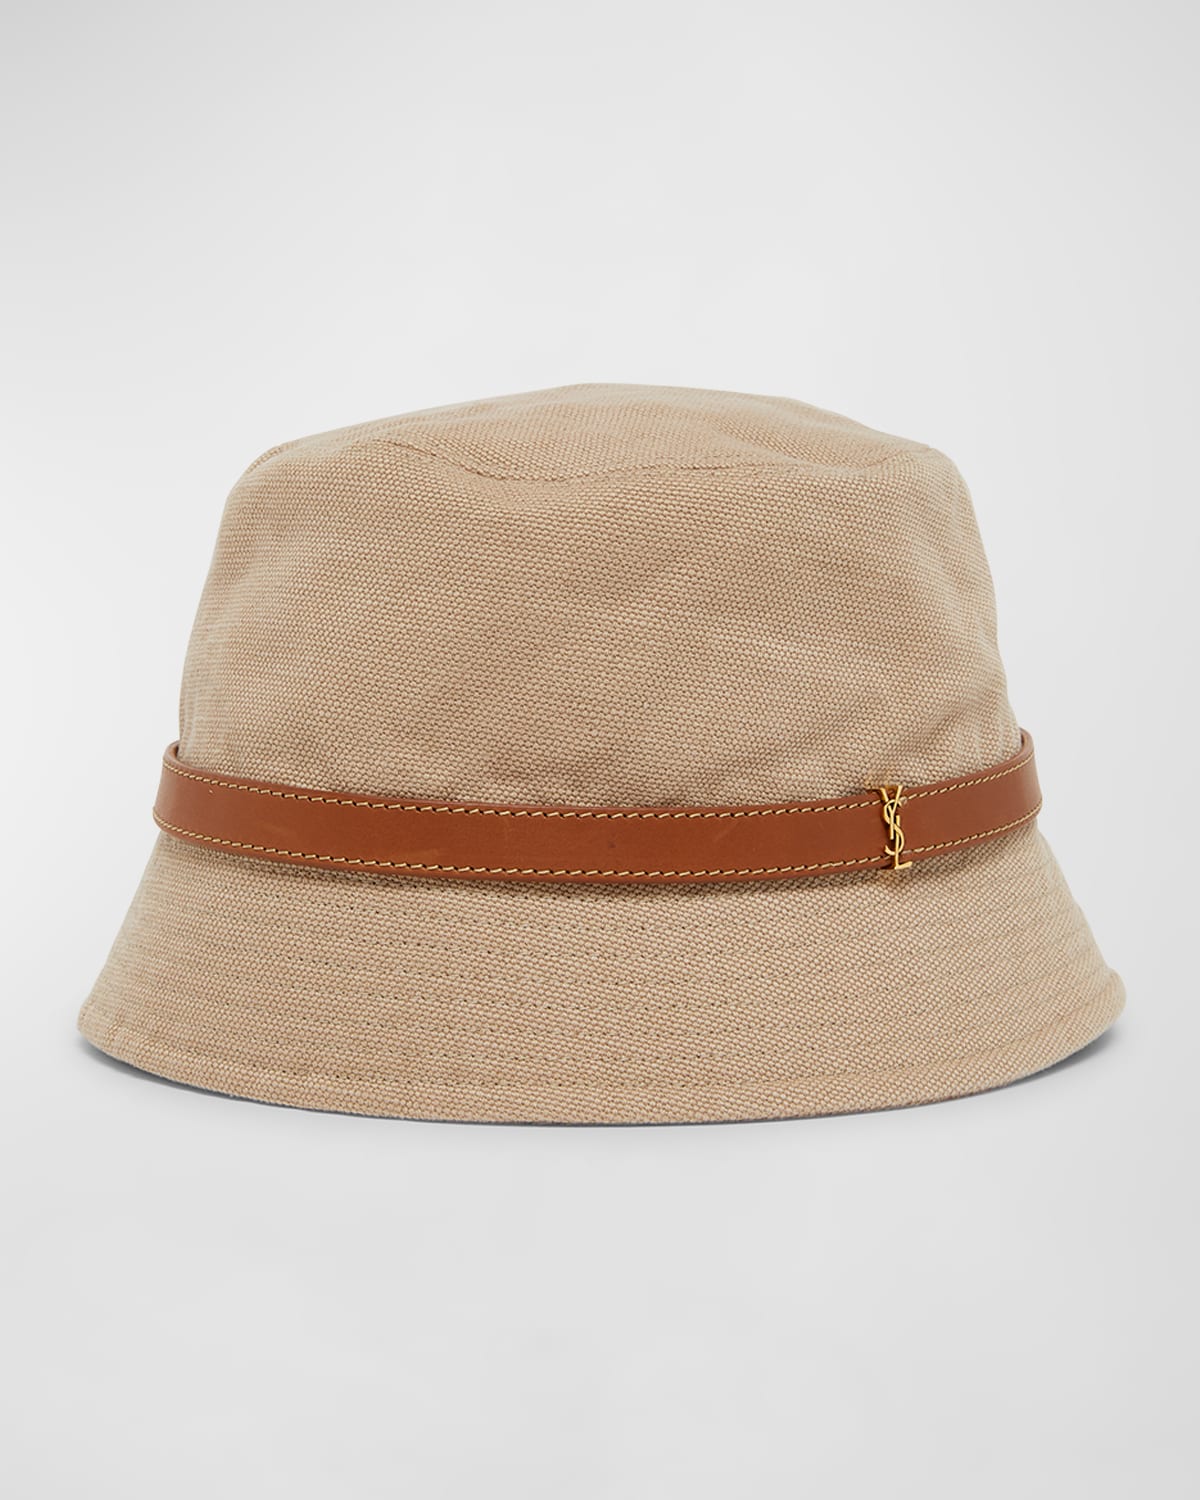 Saint Laurent Canvas Bucket Hat With A Ysl Leather Band In Brown